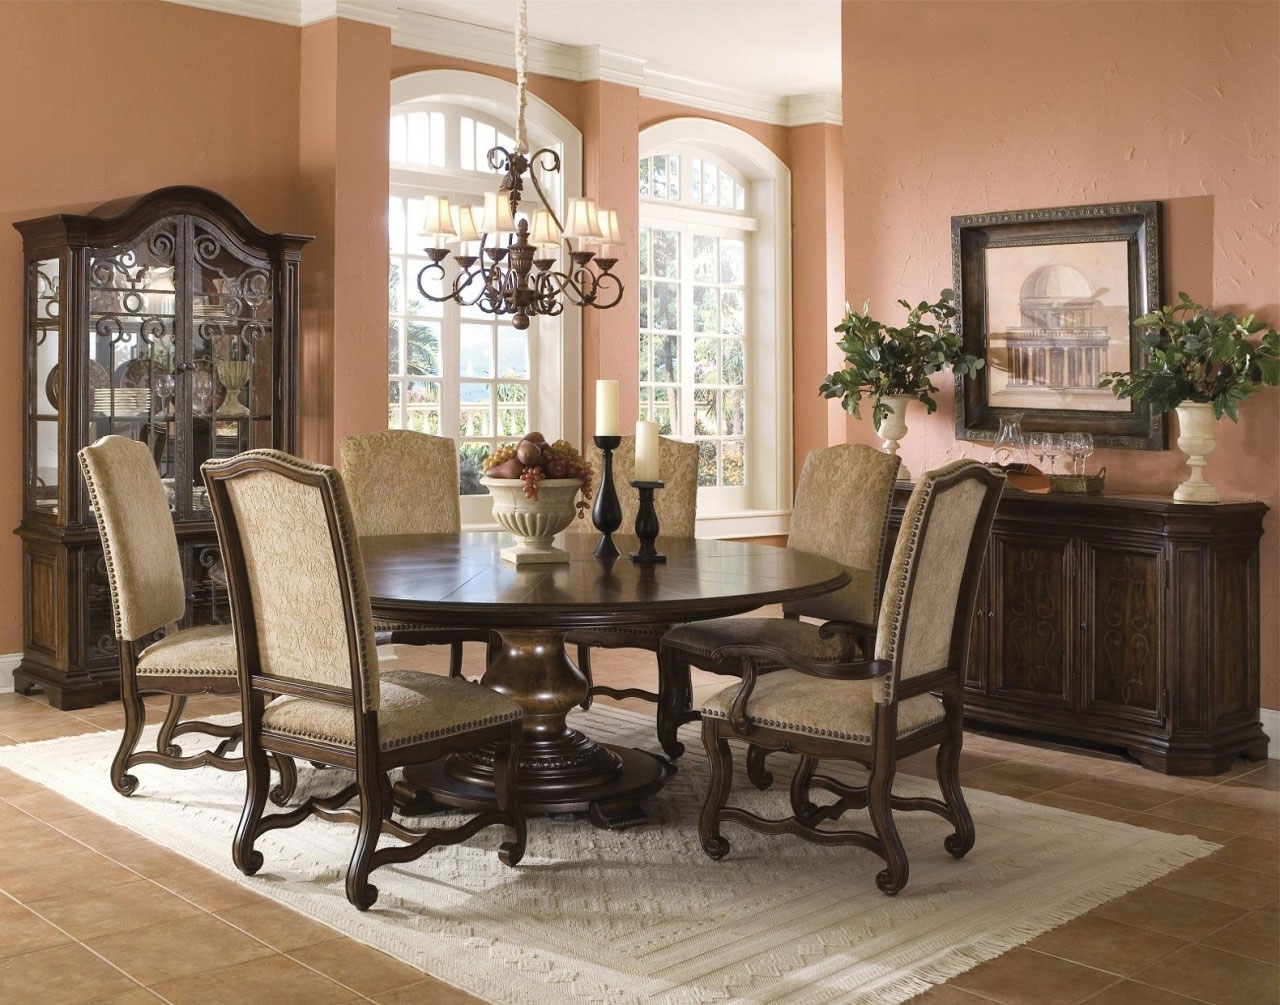 Small Circle Dining Room Table photo - 8